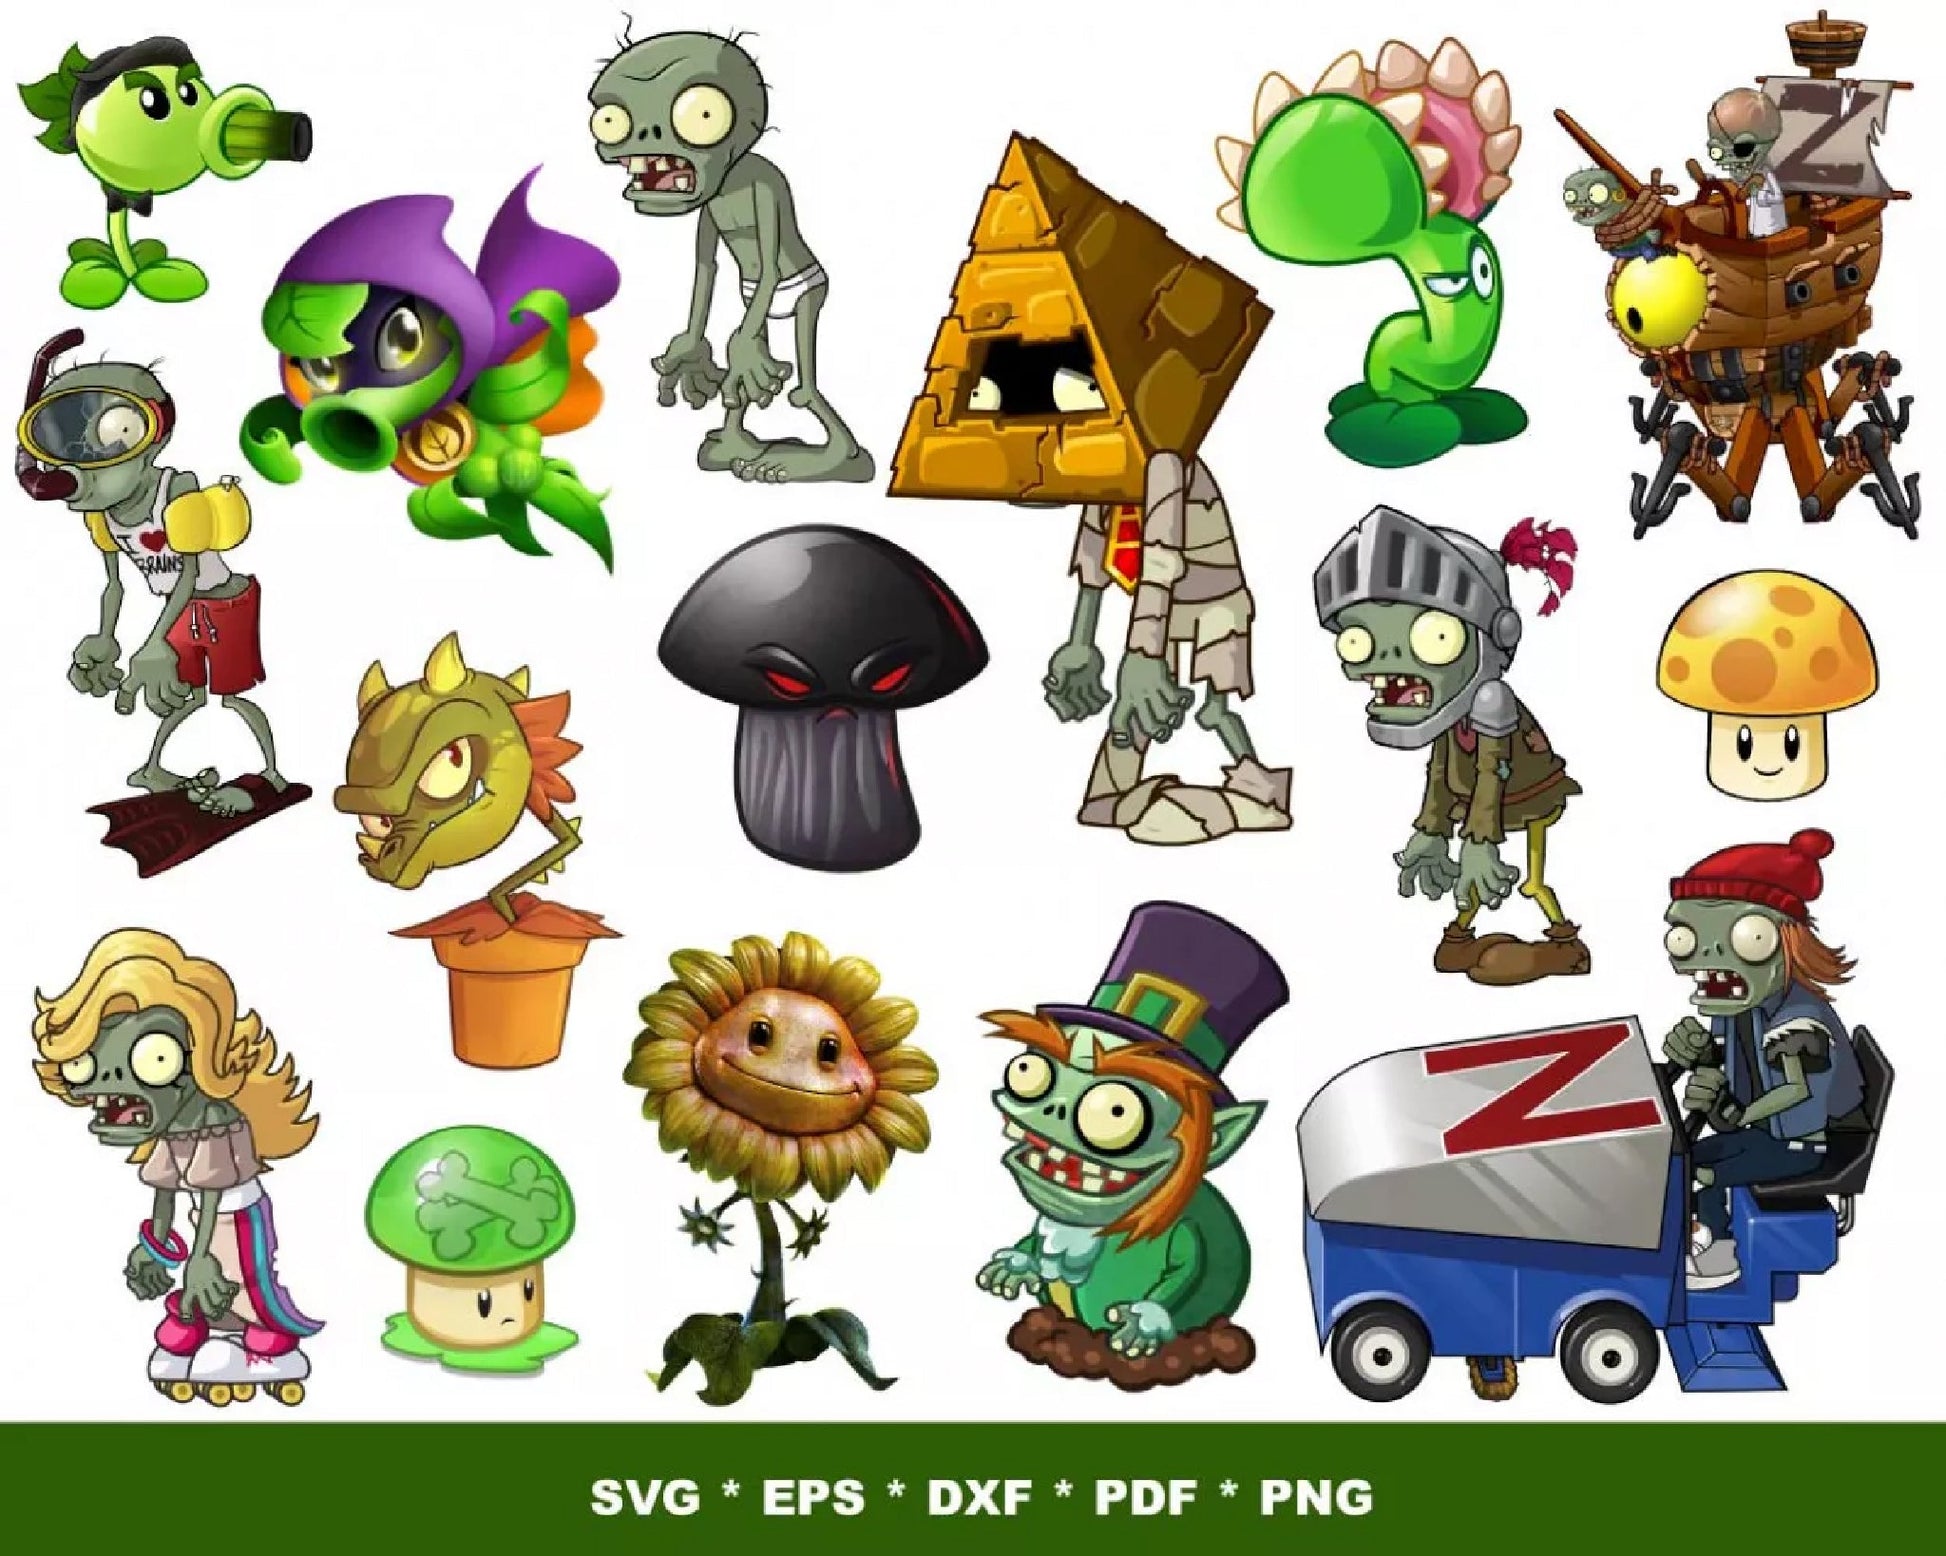 Plants vs Zombies Svg, Dxf, Eps, Png, Clipart, Silhouette and Cutfiles